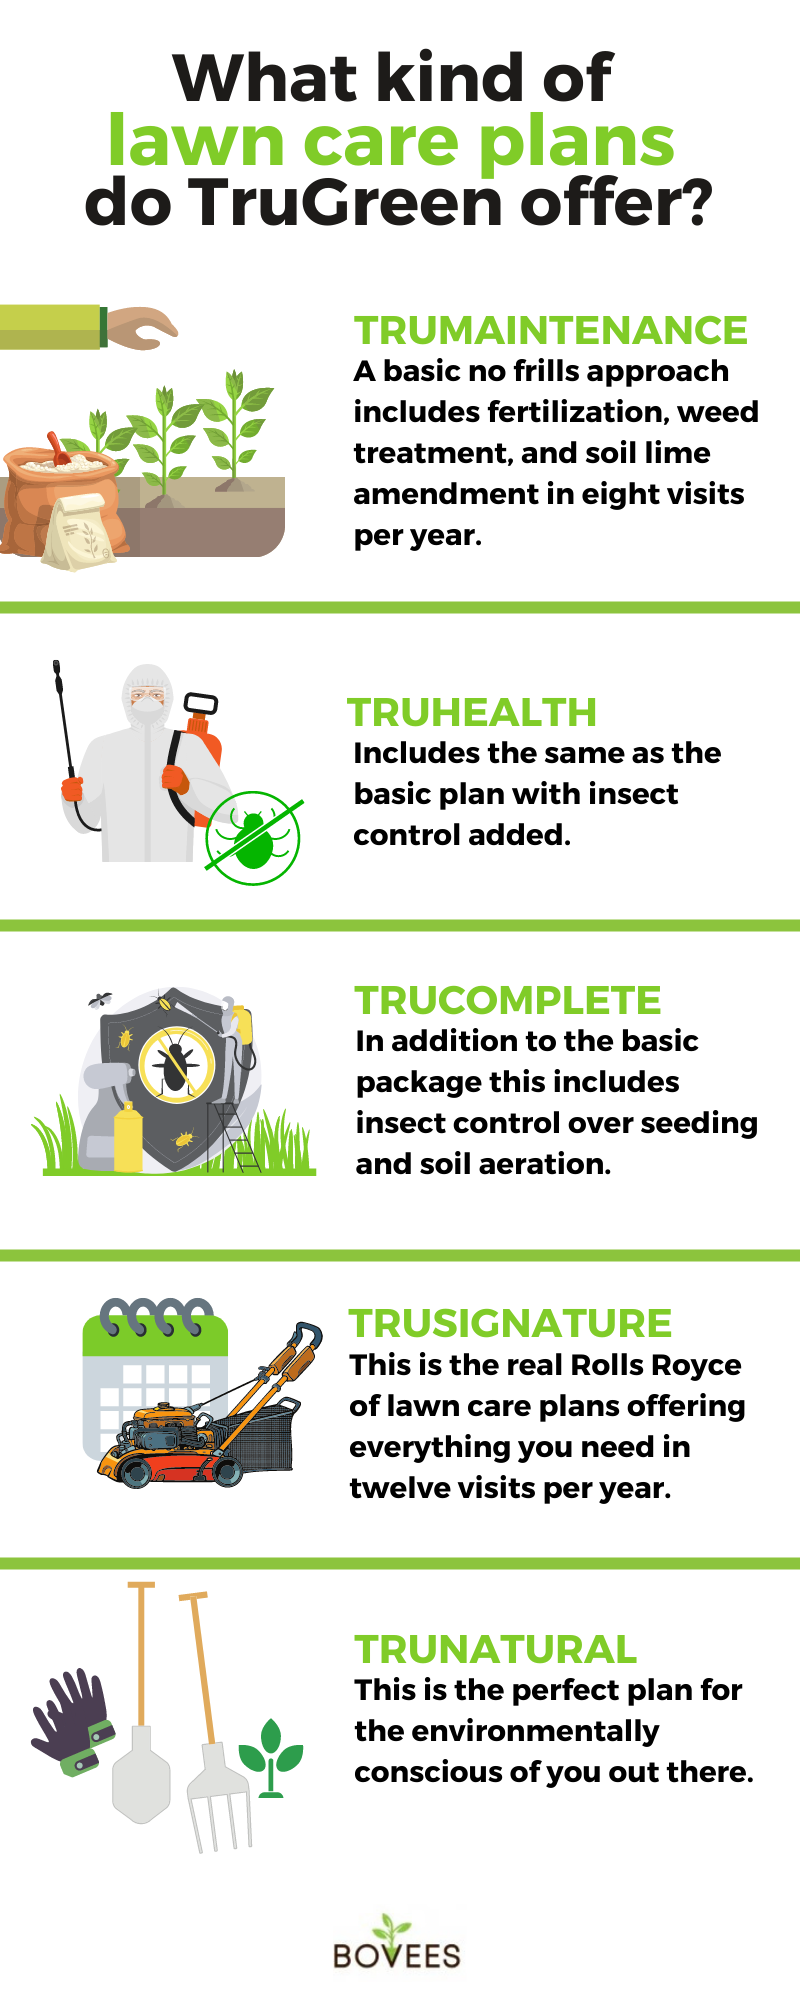 How Much Does Trugreen Actually Cost